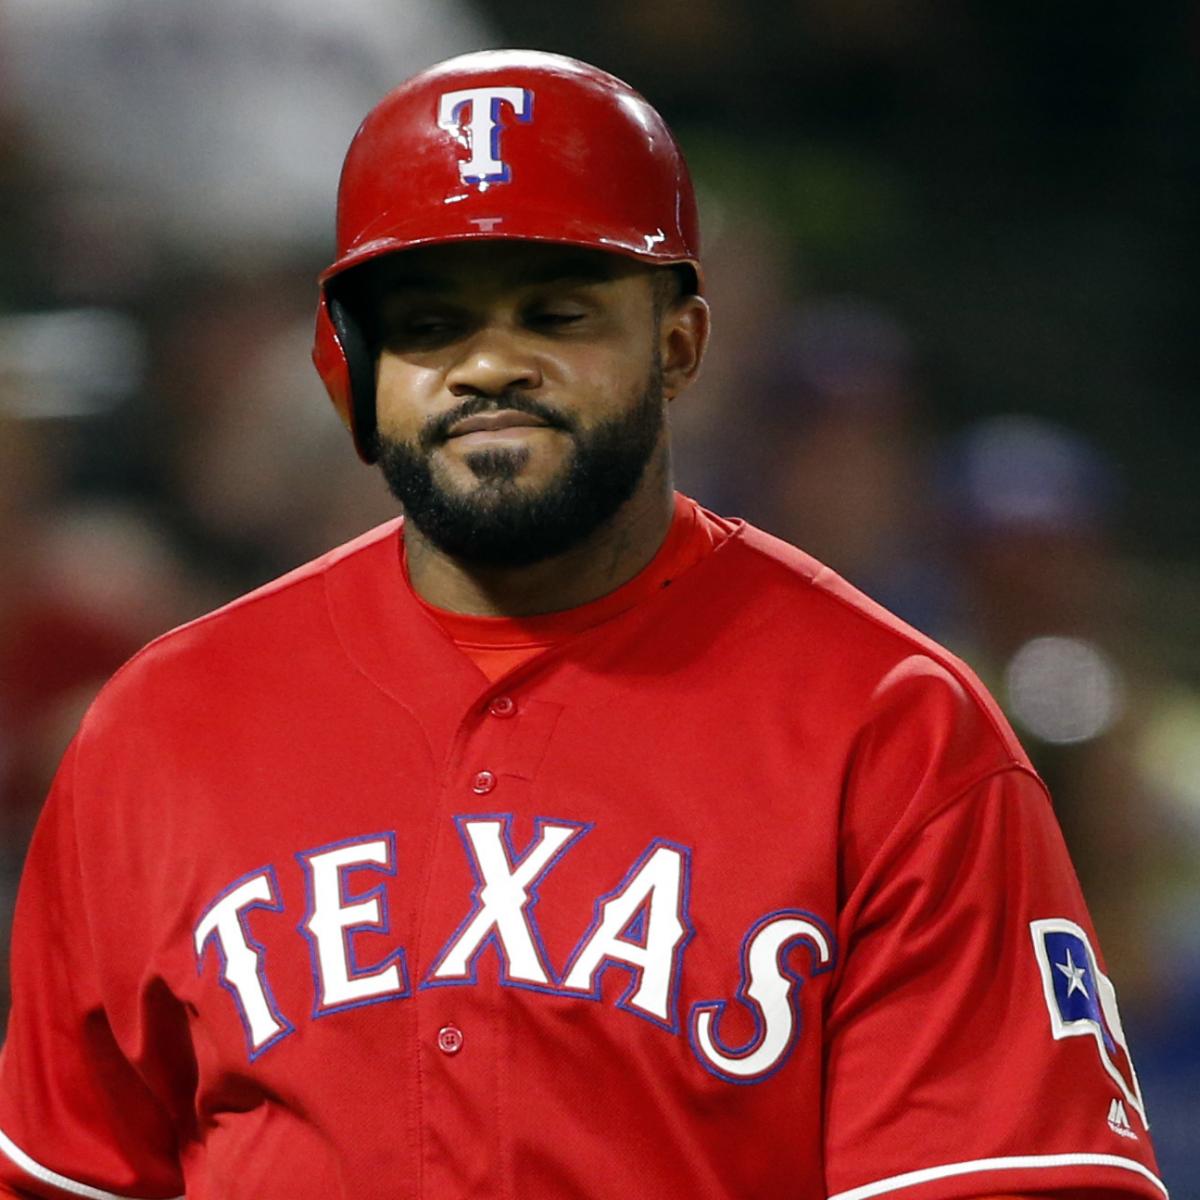 Detroit Tigers Prince Fielder Reportedly Retiring